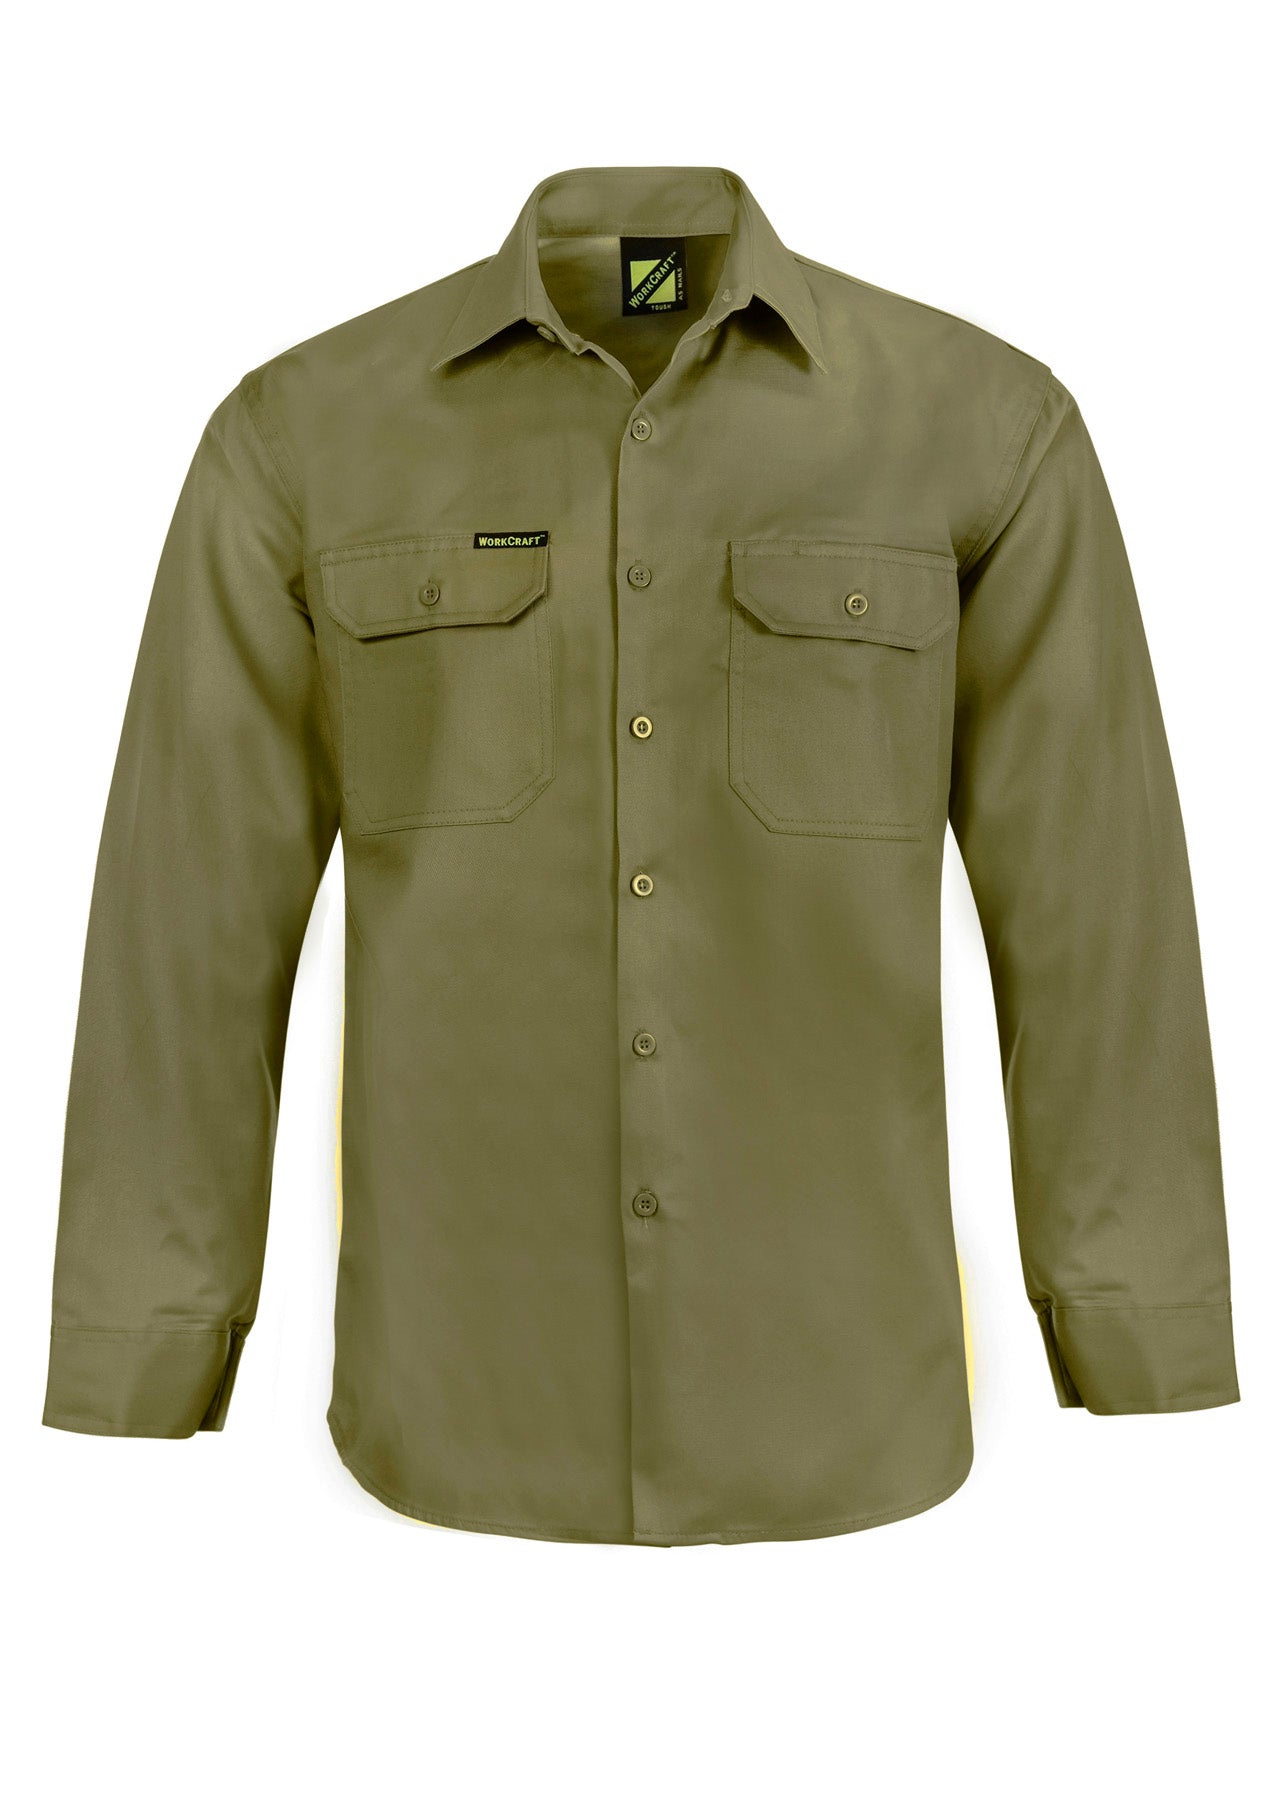 Long Sleeve Cotton Drill Shirt - made by Workcraft